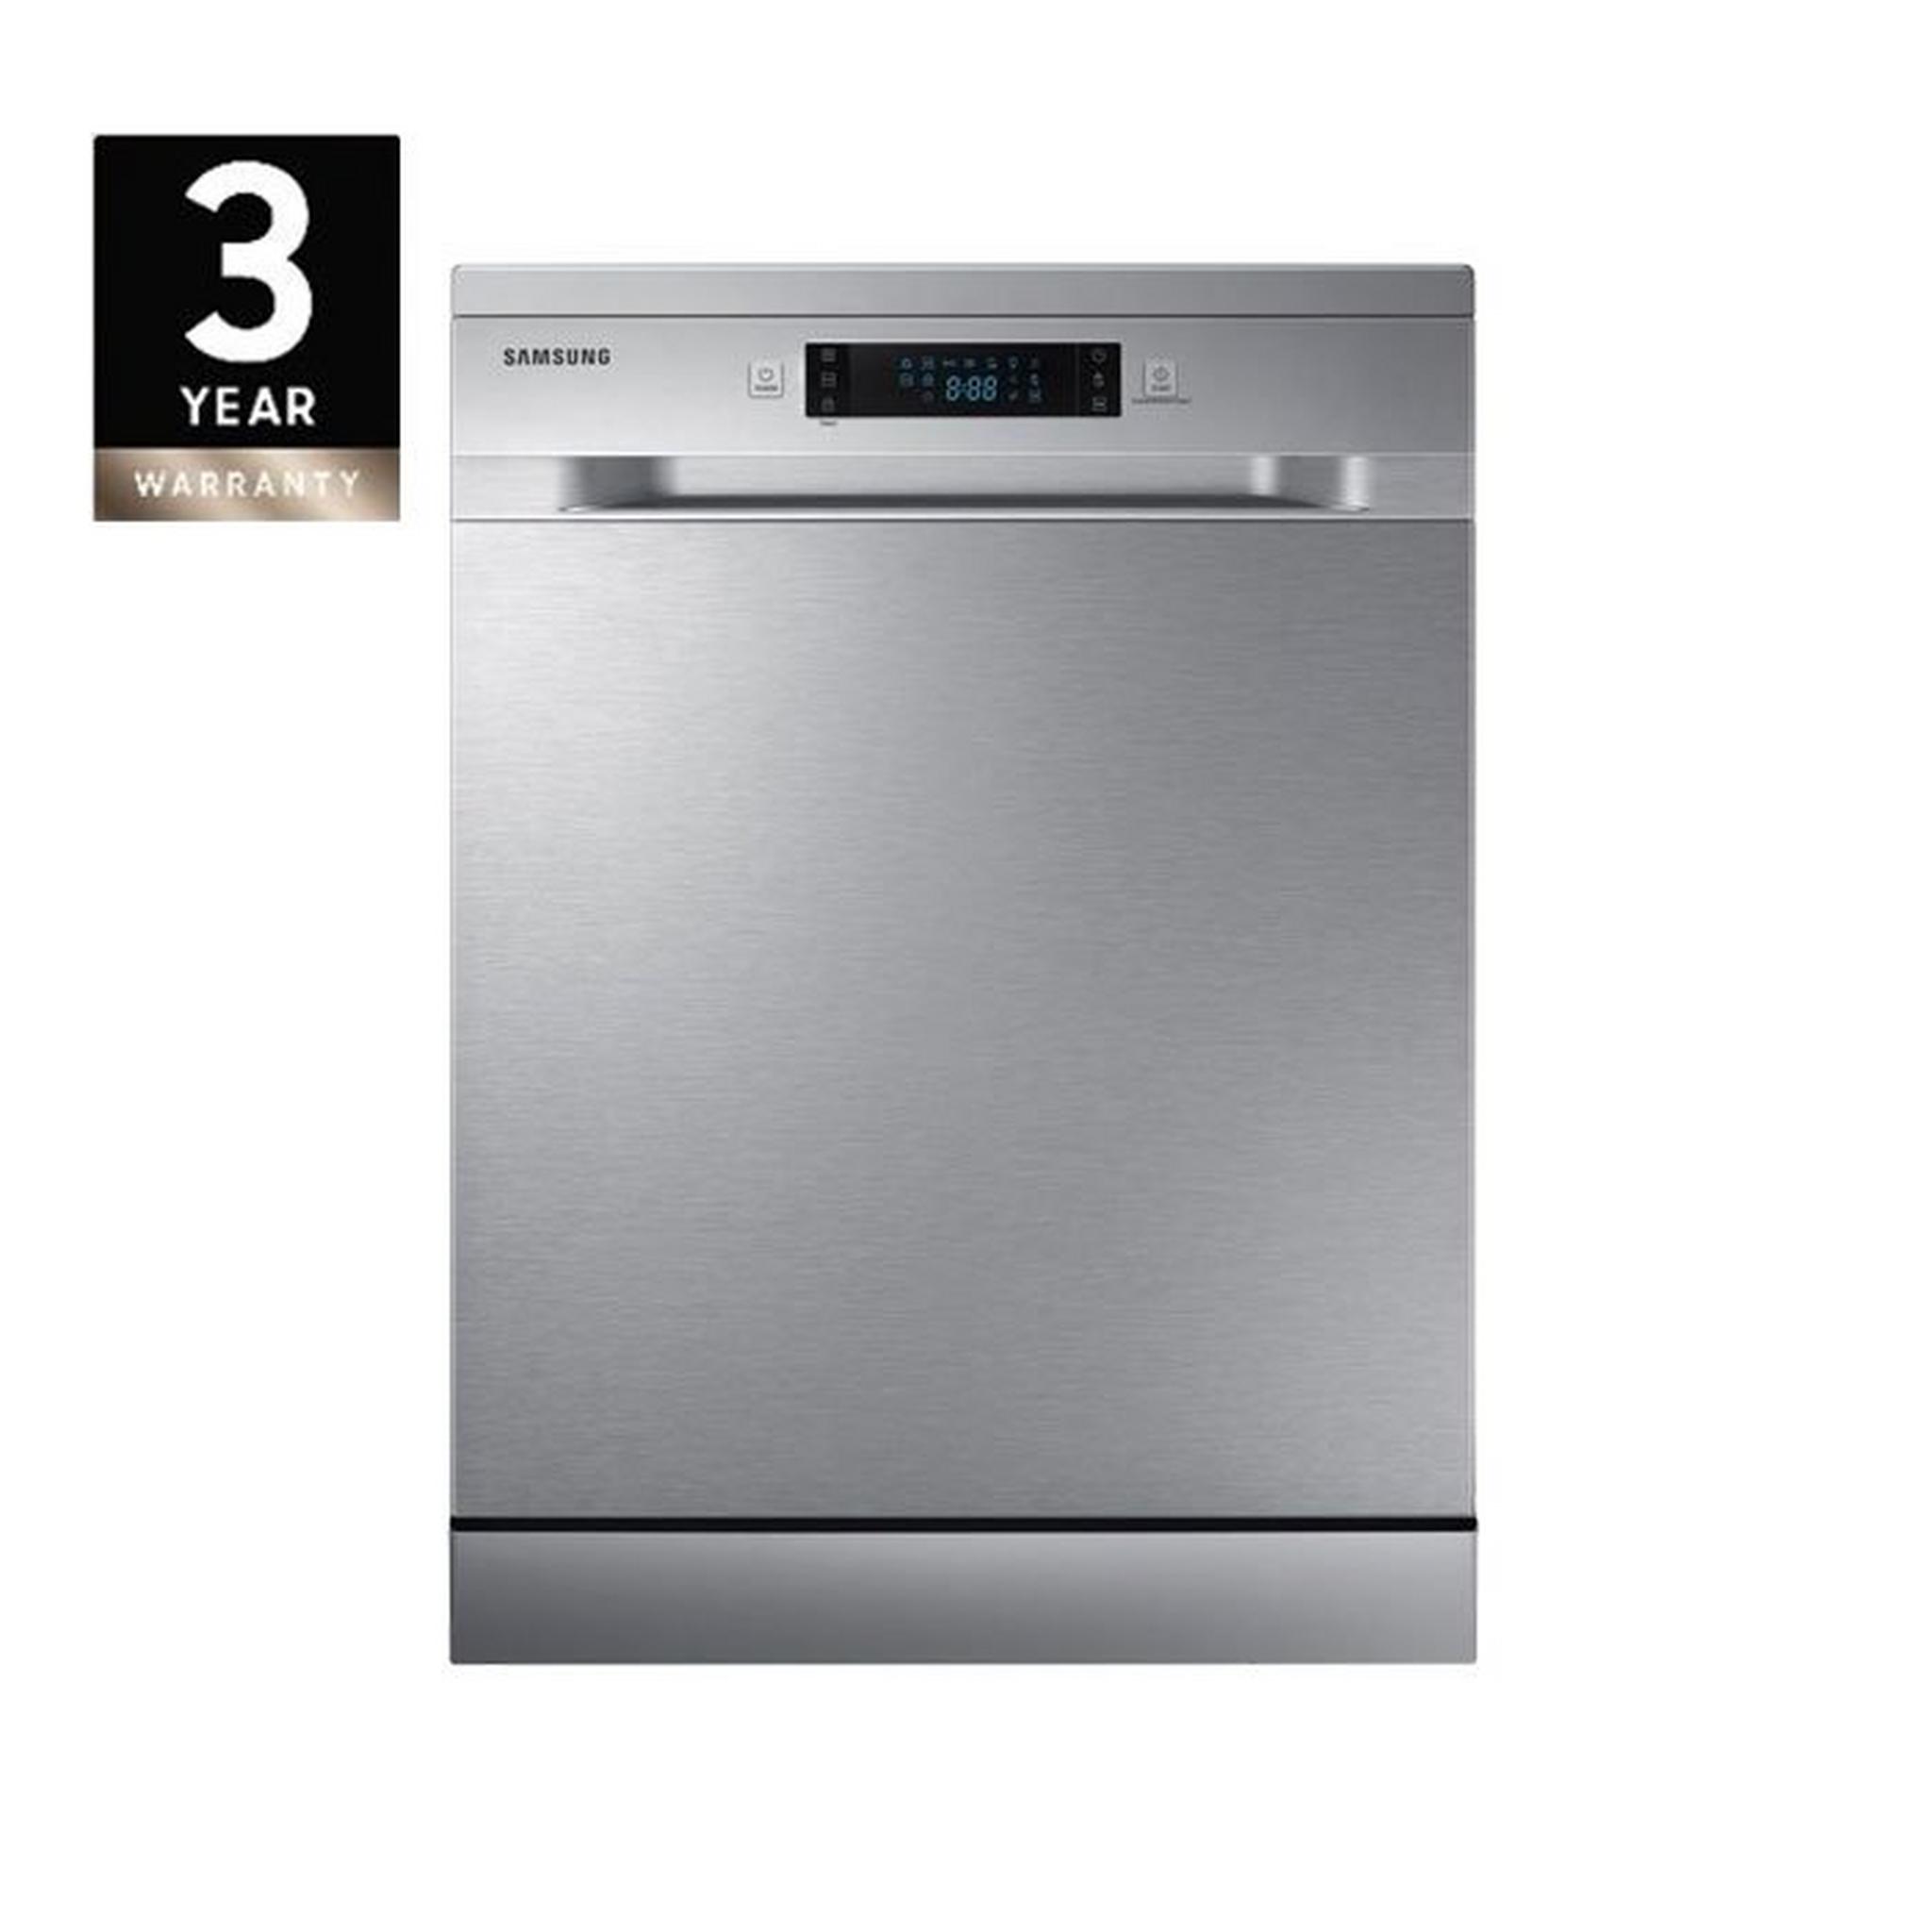 Samsung Dishwasher 7 Programs 14 Place Settings (DW60M5070FS) - Stainless Steel